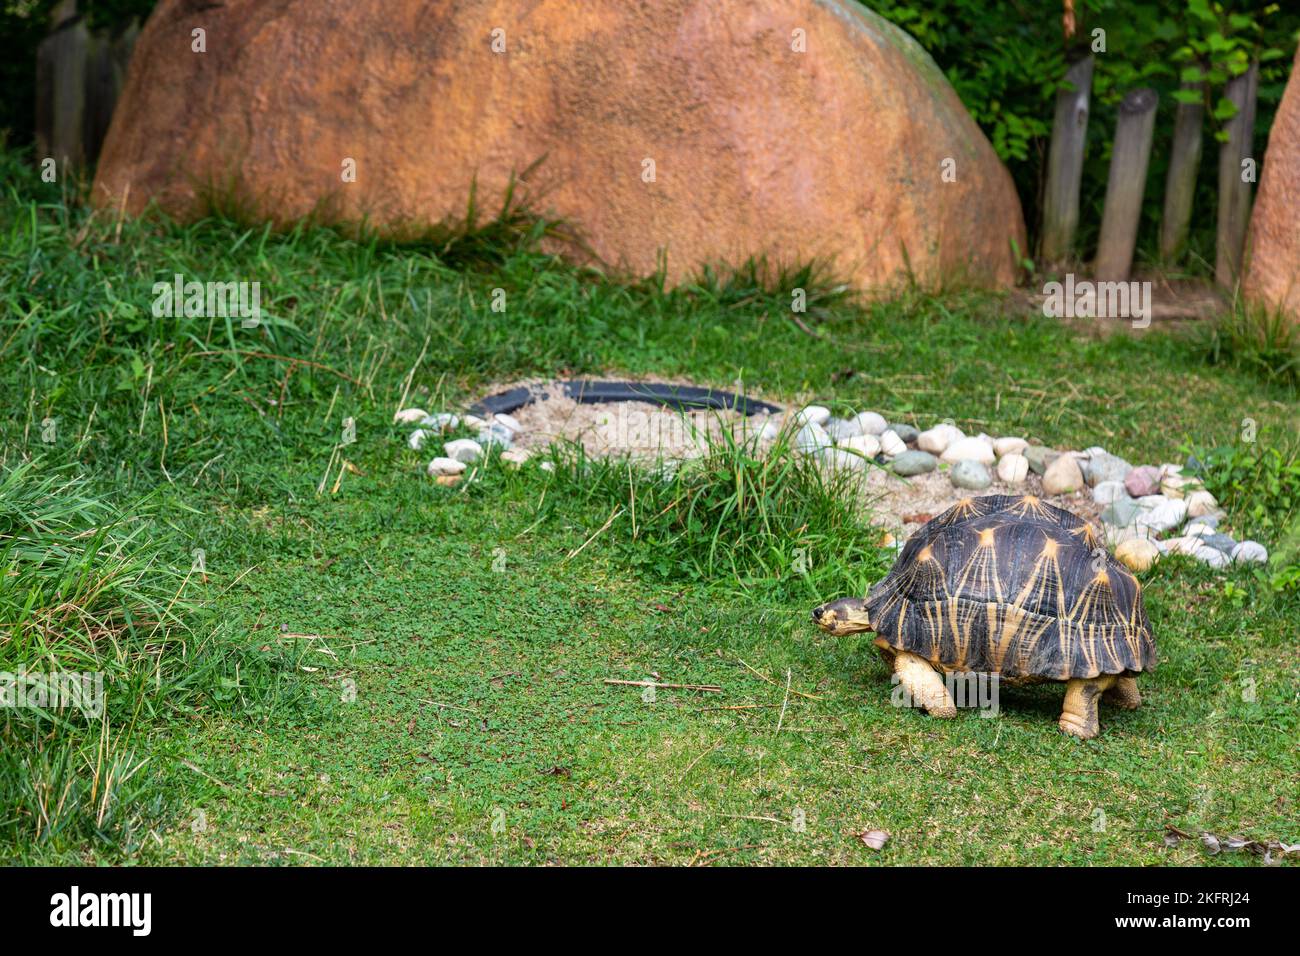 A radiated tortoise slowly walks through his enclosure at the Fort Wayne Children's Zoo in Fort Wayne, Indiana, USA. Stock Photo